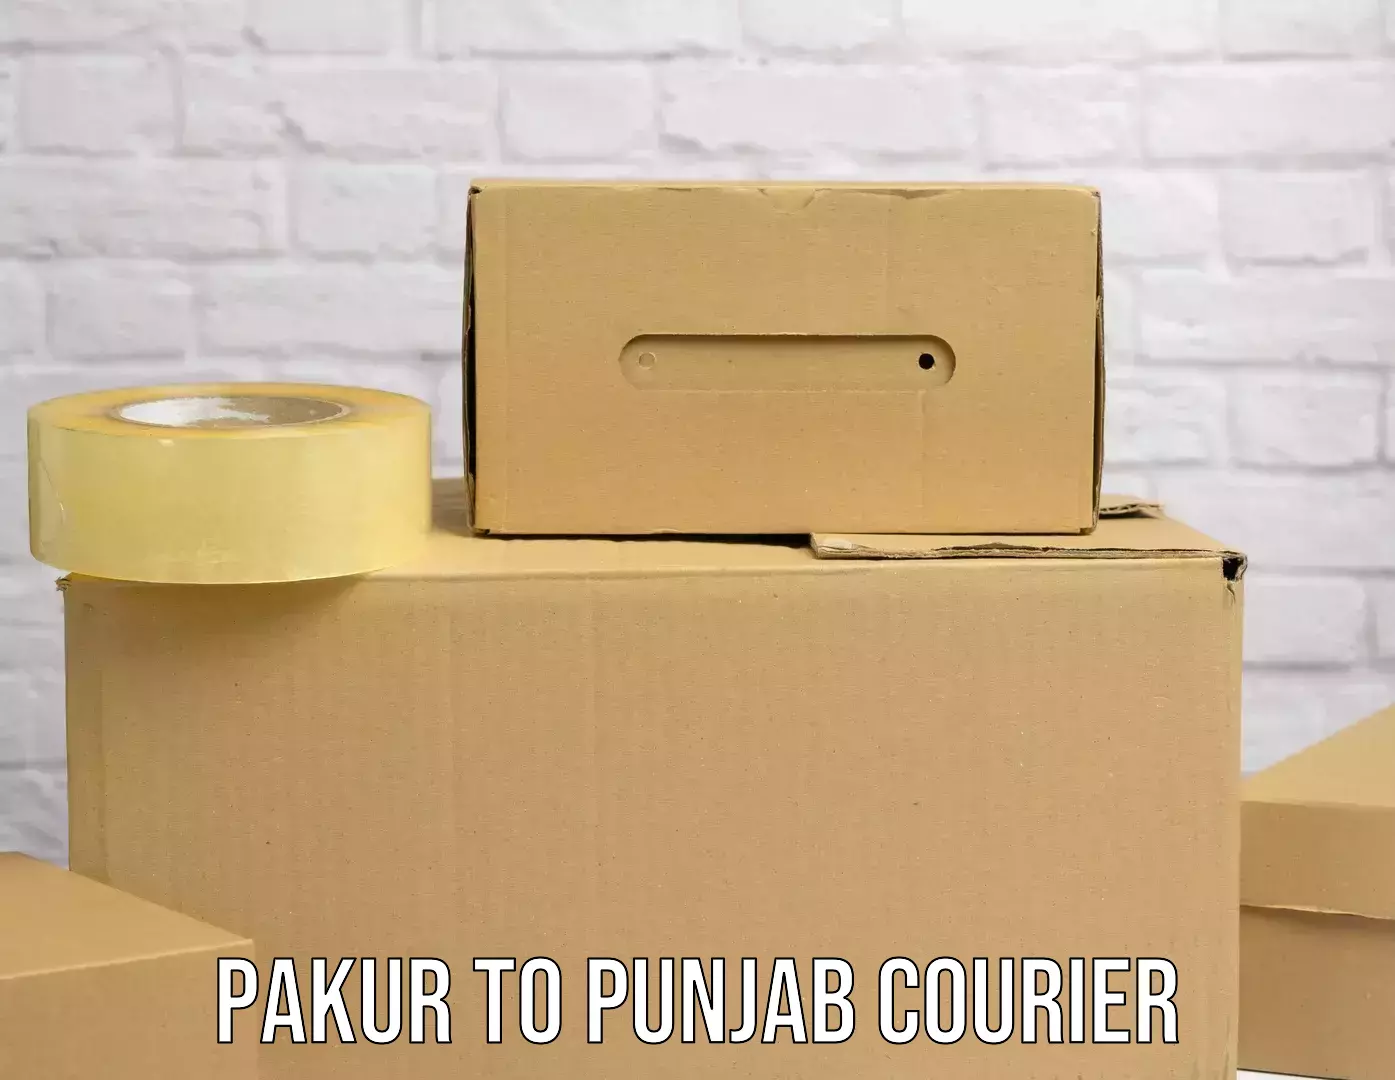 Efficient freight service Pakur to Mohali